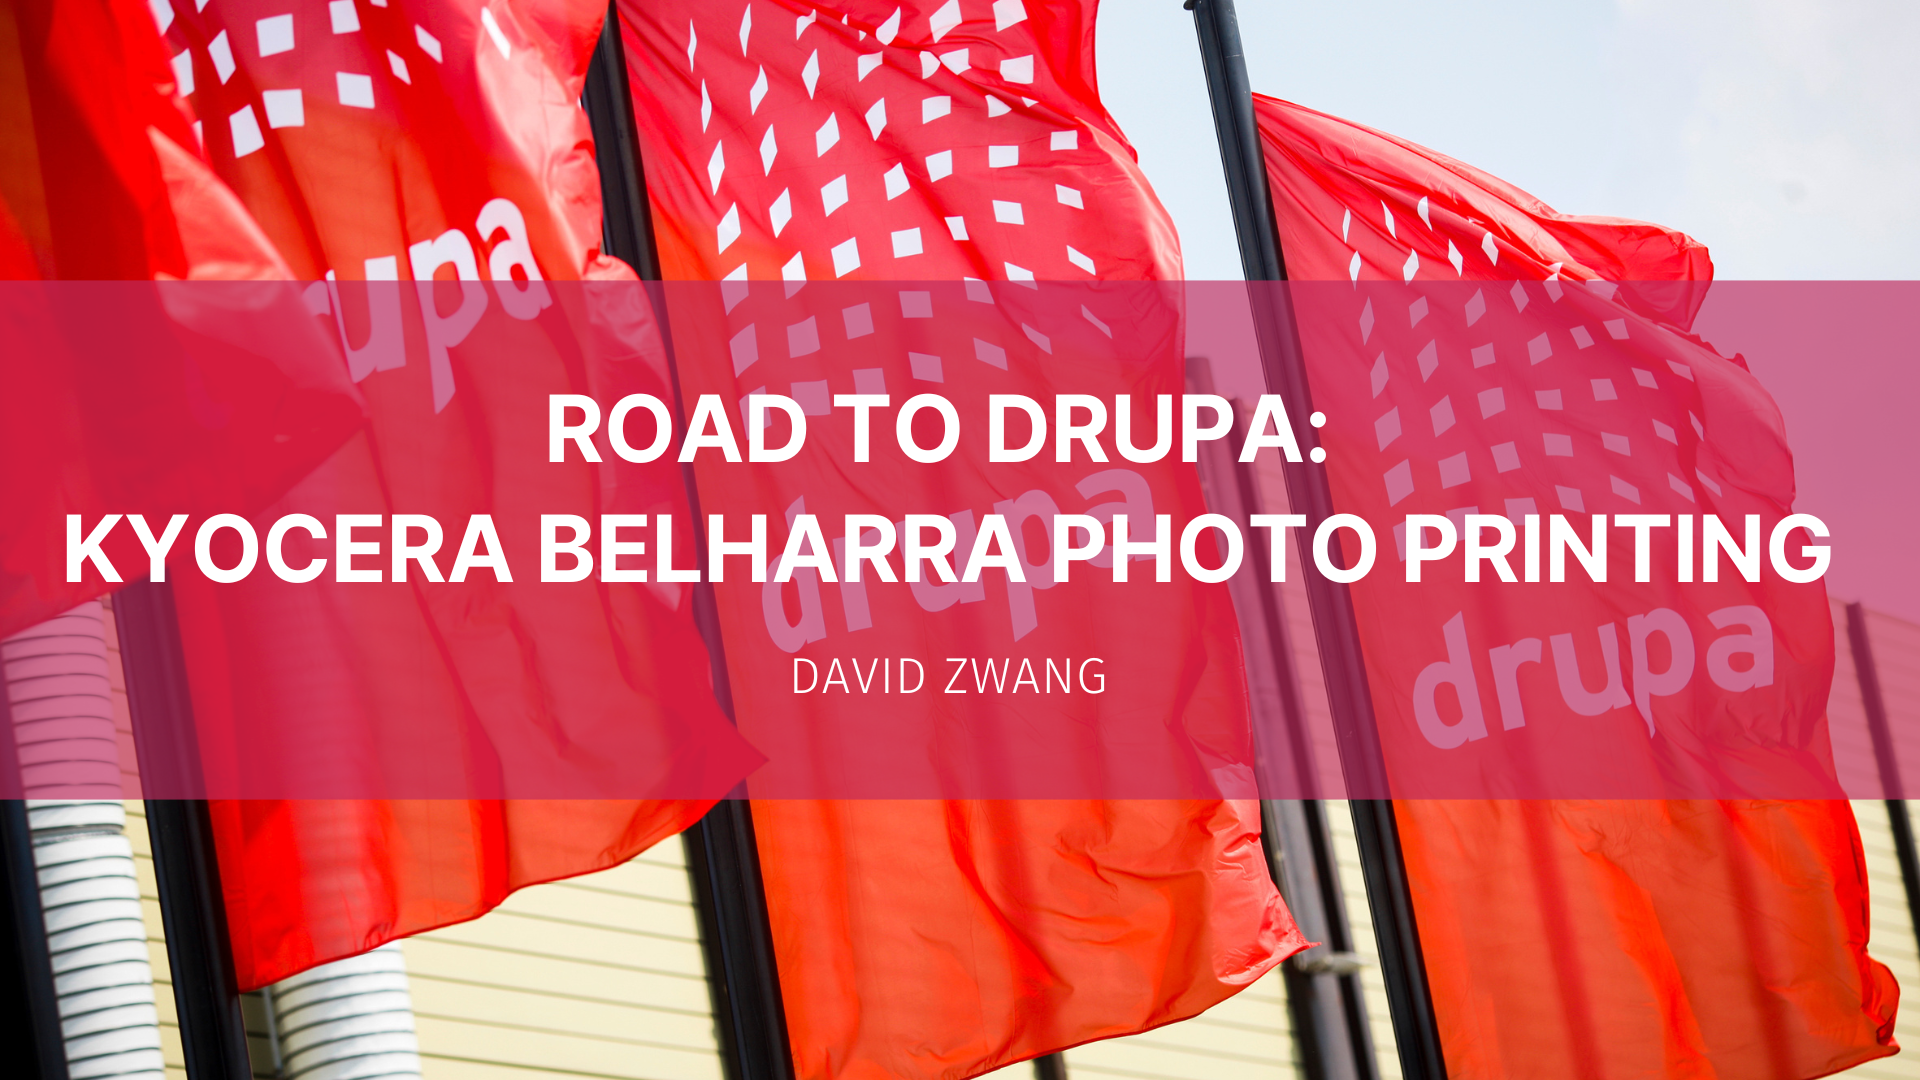 Featured image for “Kyocera Belharra Photo Printing on the Road to drupa”